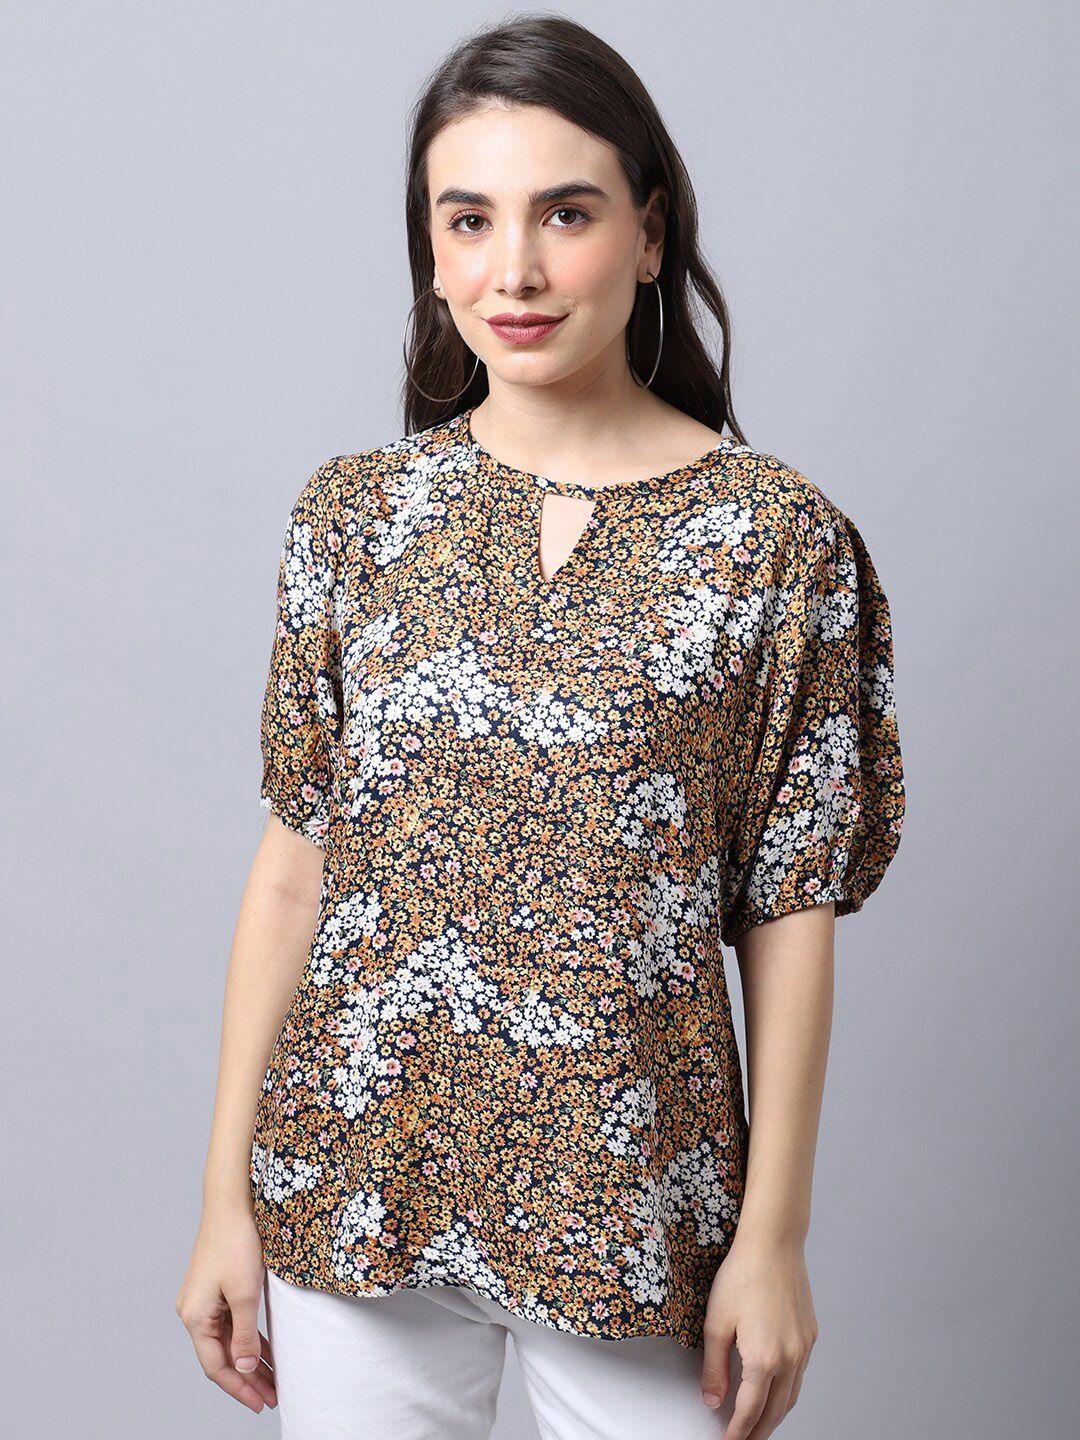 cantabil yellow & white floral printed keyhole neck top